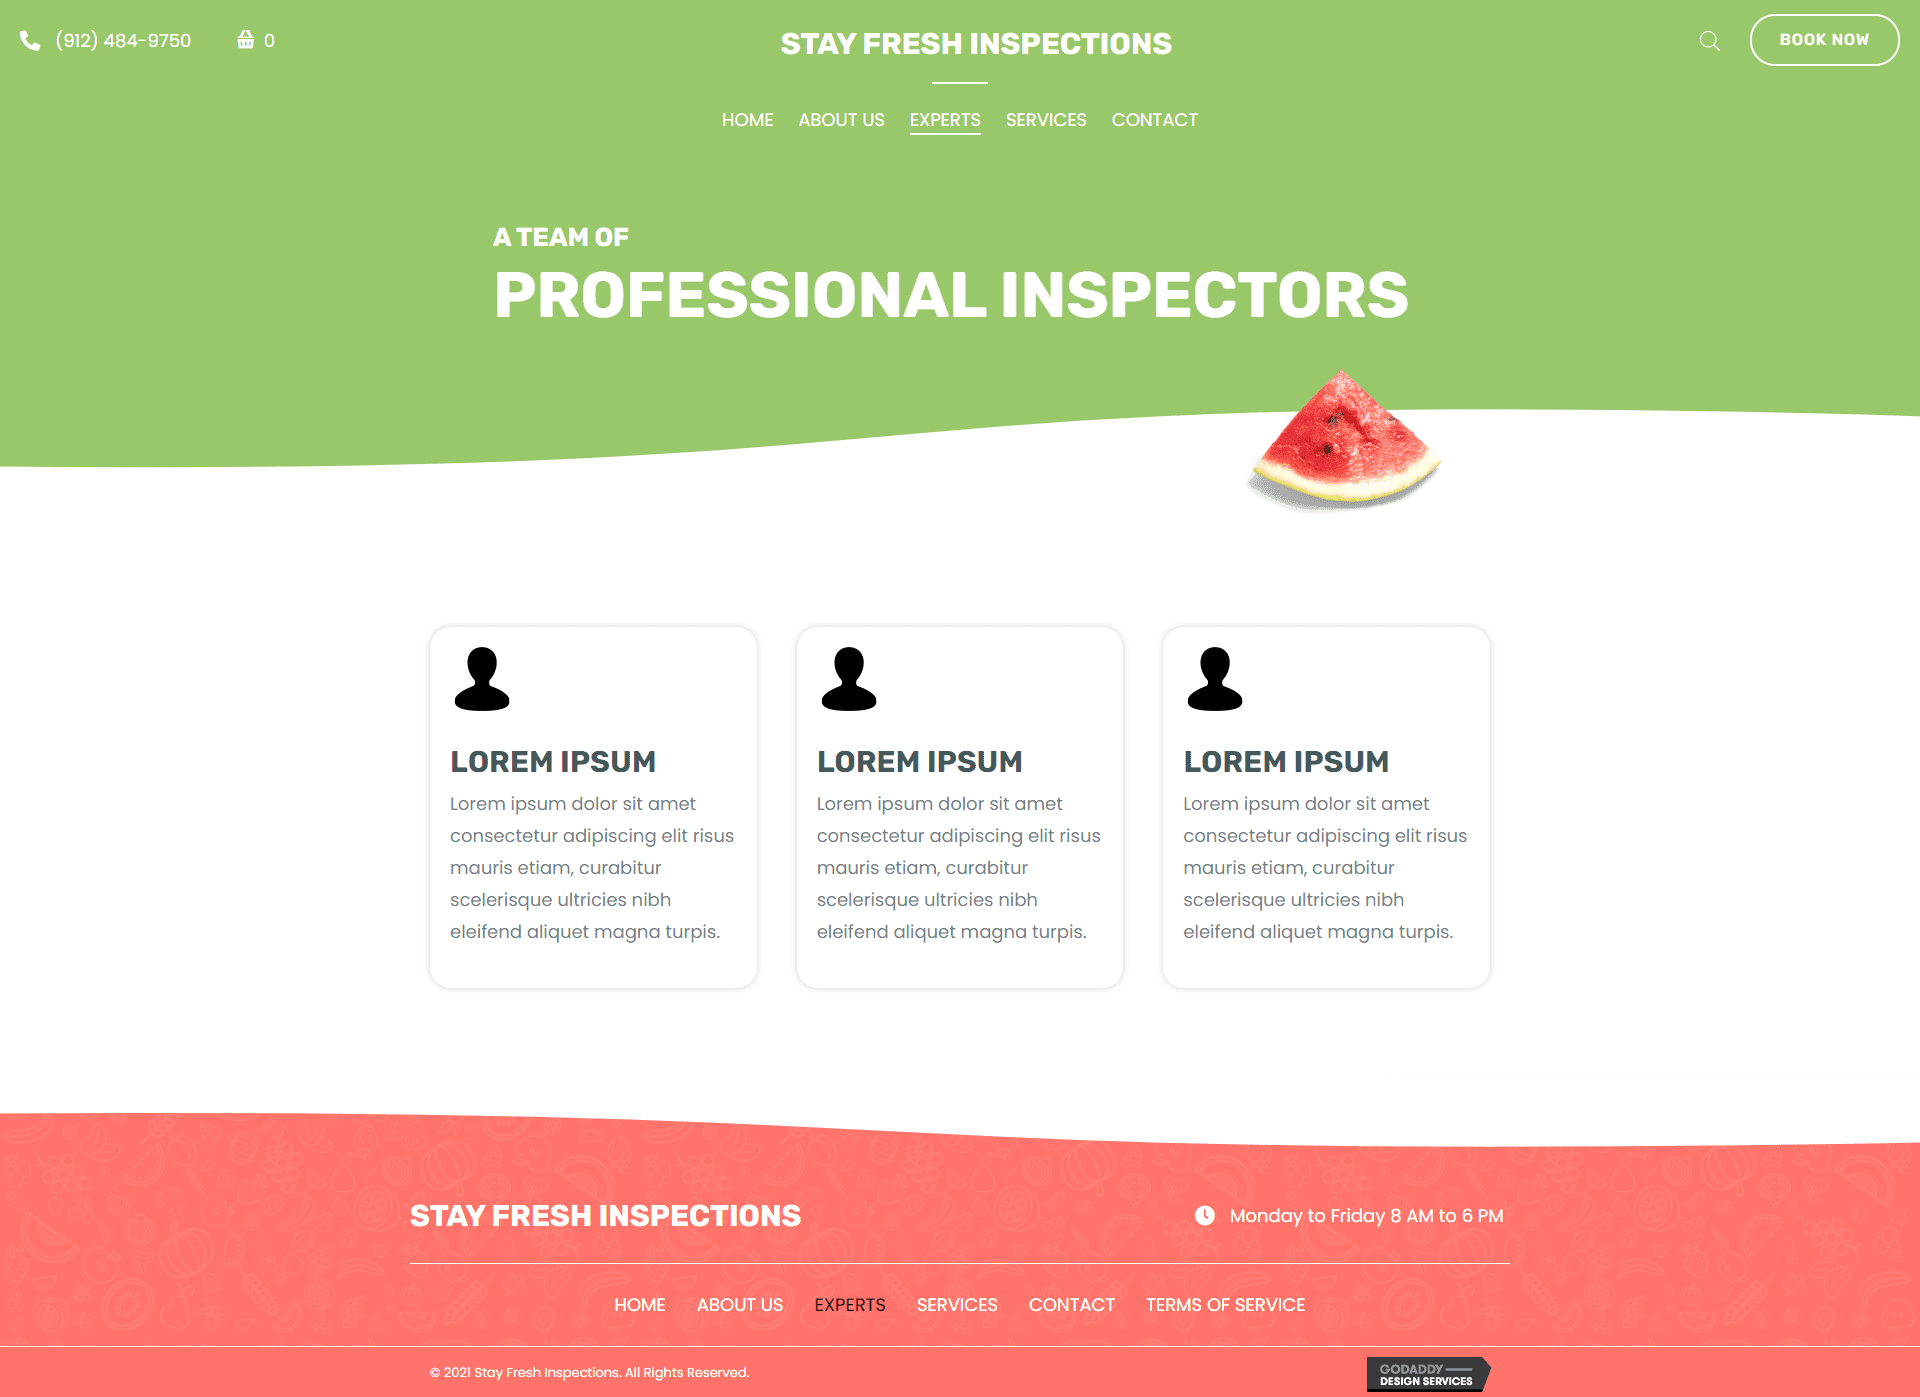 Stay Fresh Inspections Experts